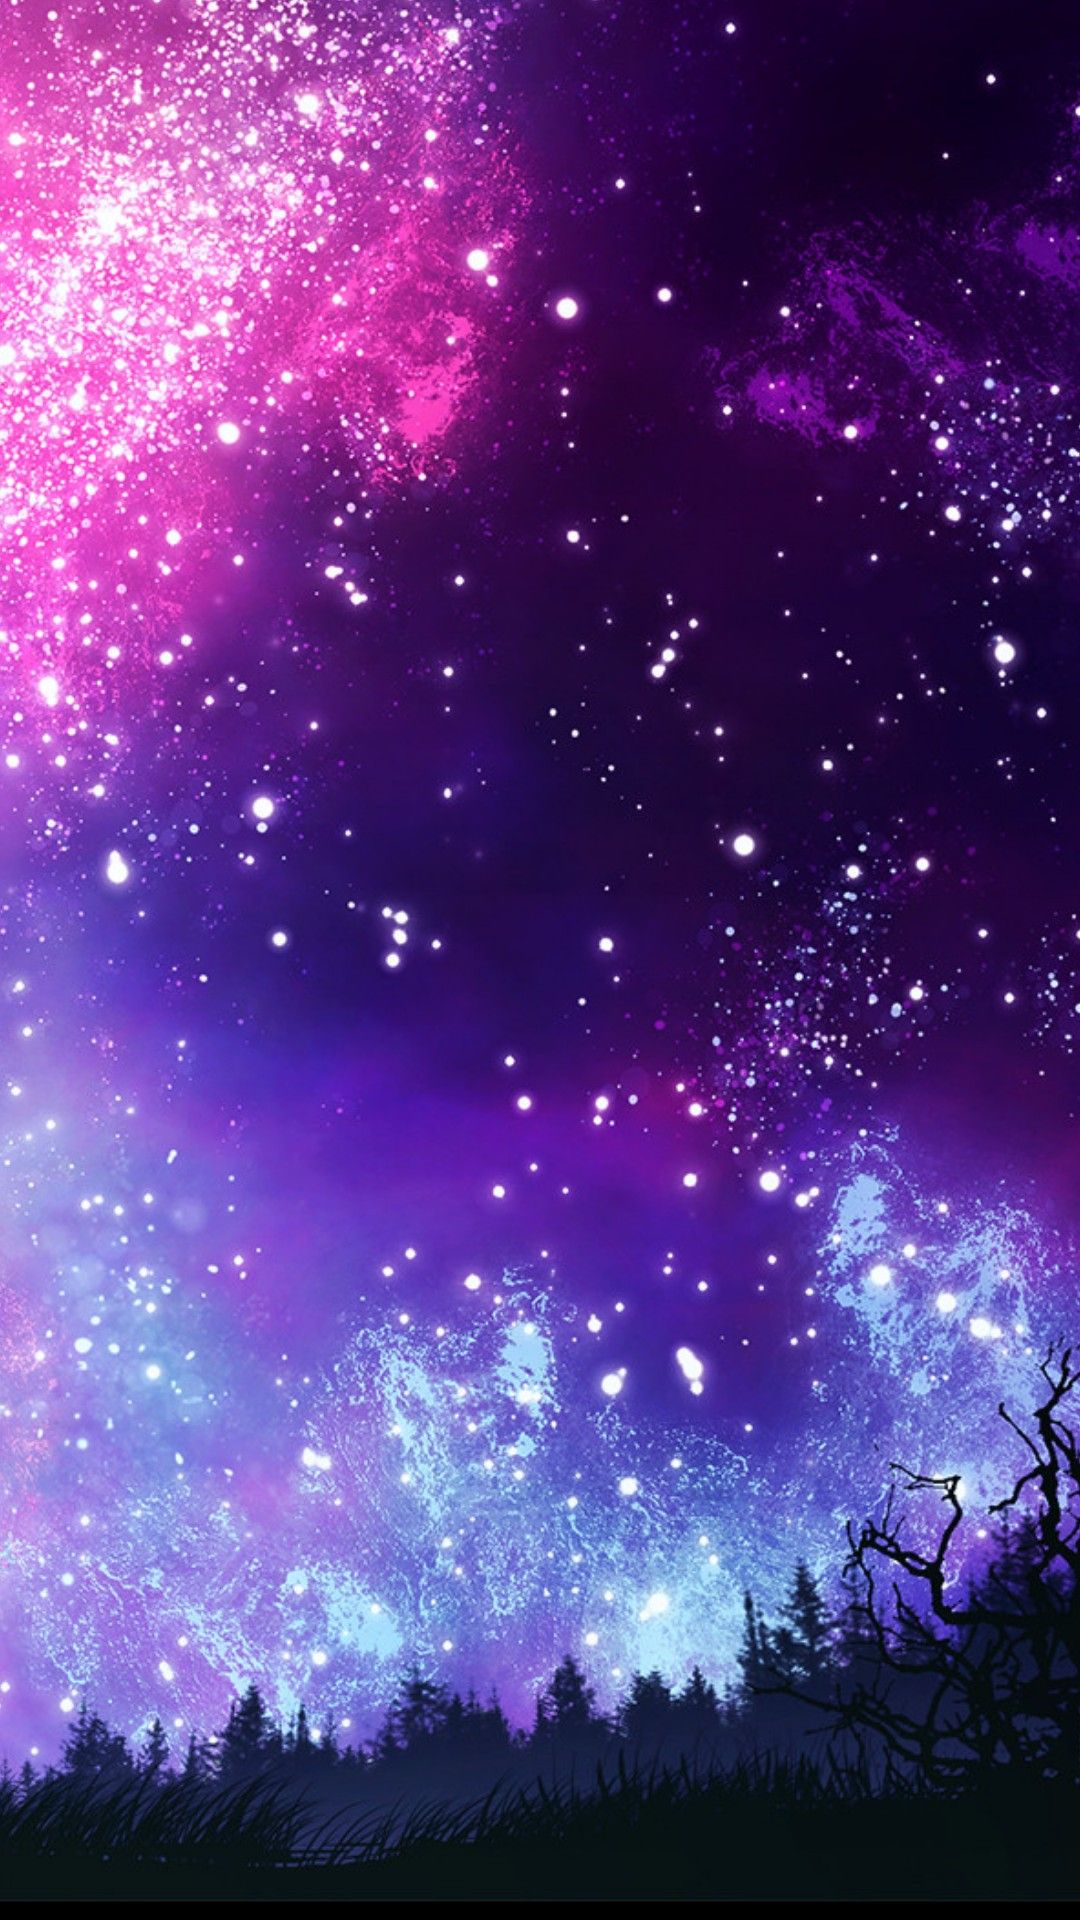 iPhone Wallpaper. Purple, Violet, Sky, Galaxy, Astronomical